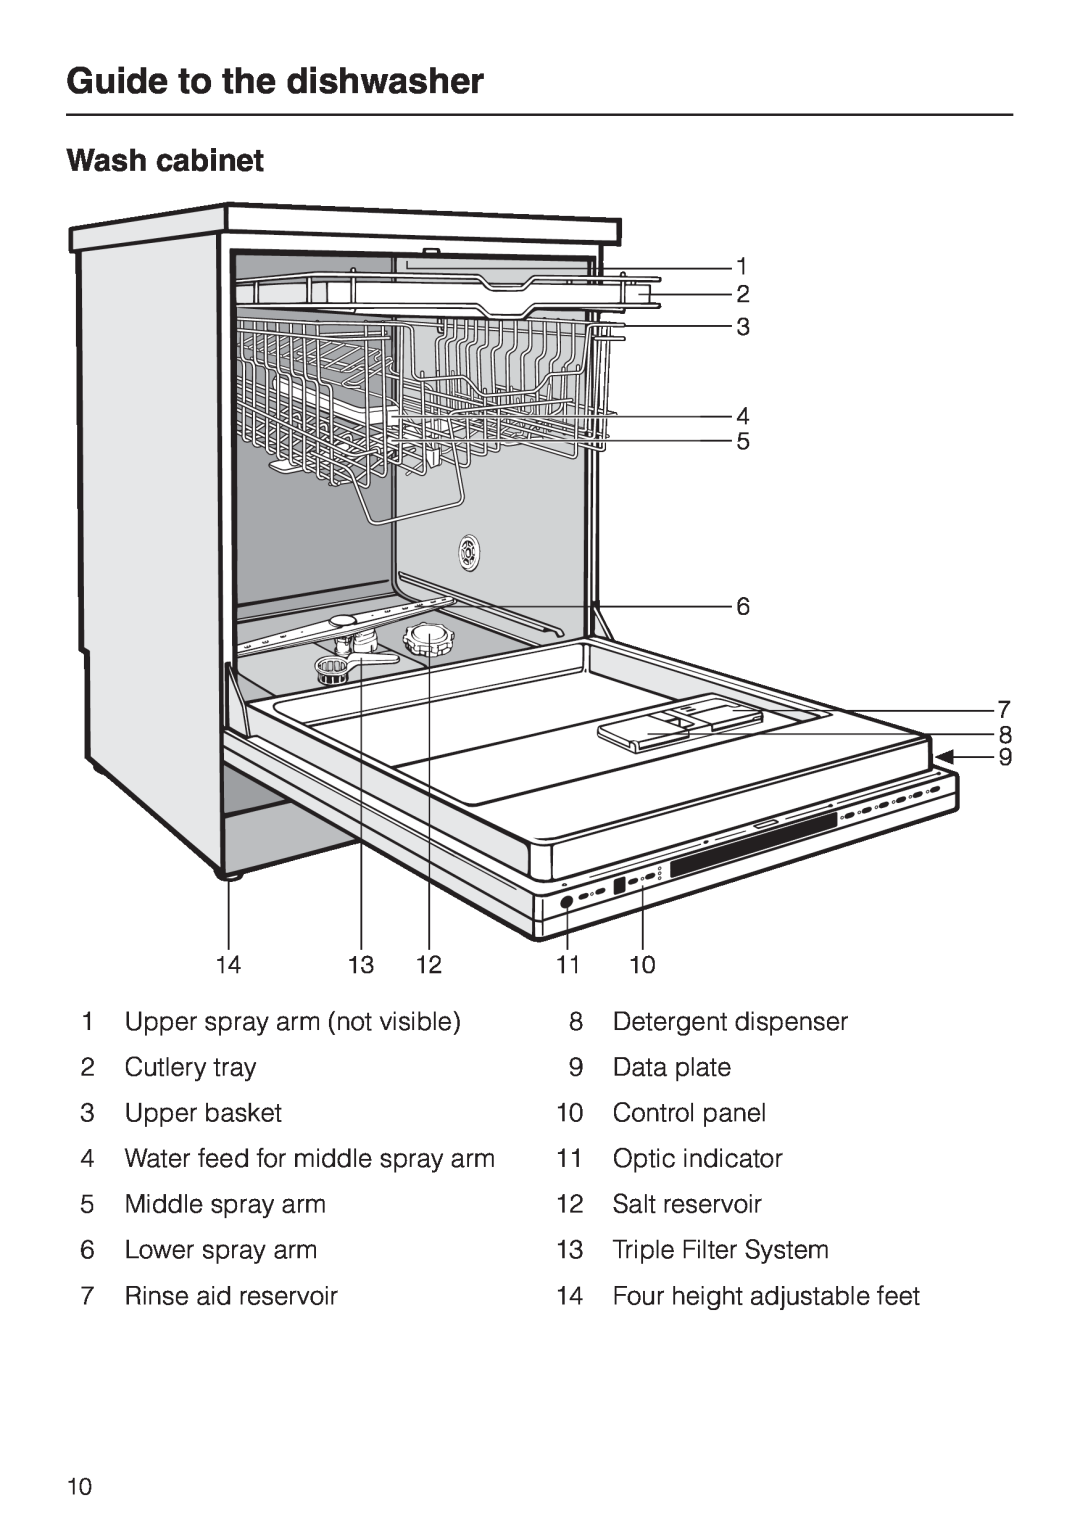 Miele G858SCVI, G658SCVI manual Guide to the dishwasher, Wash cabinet 